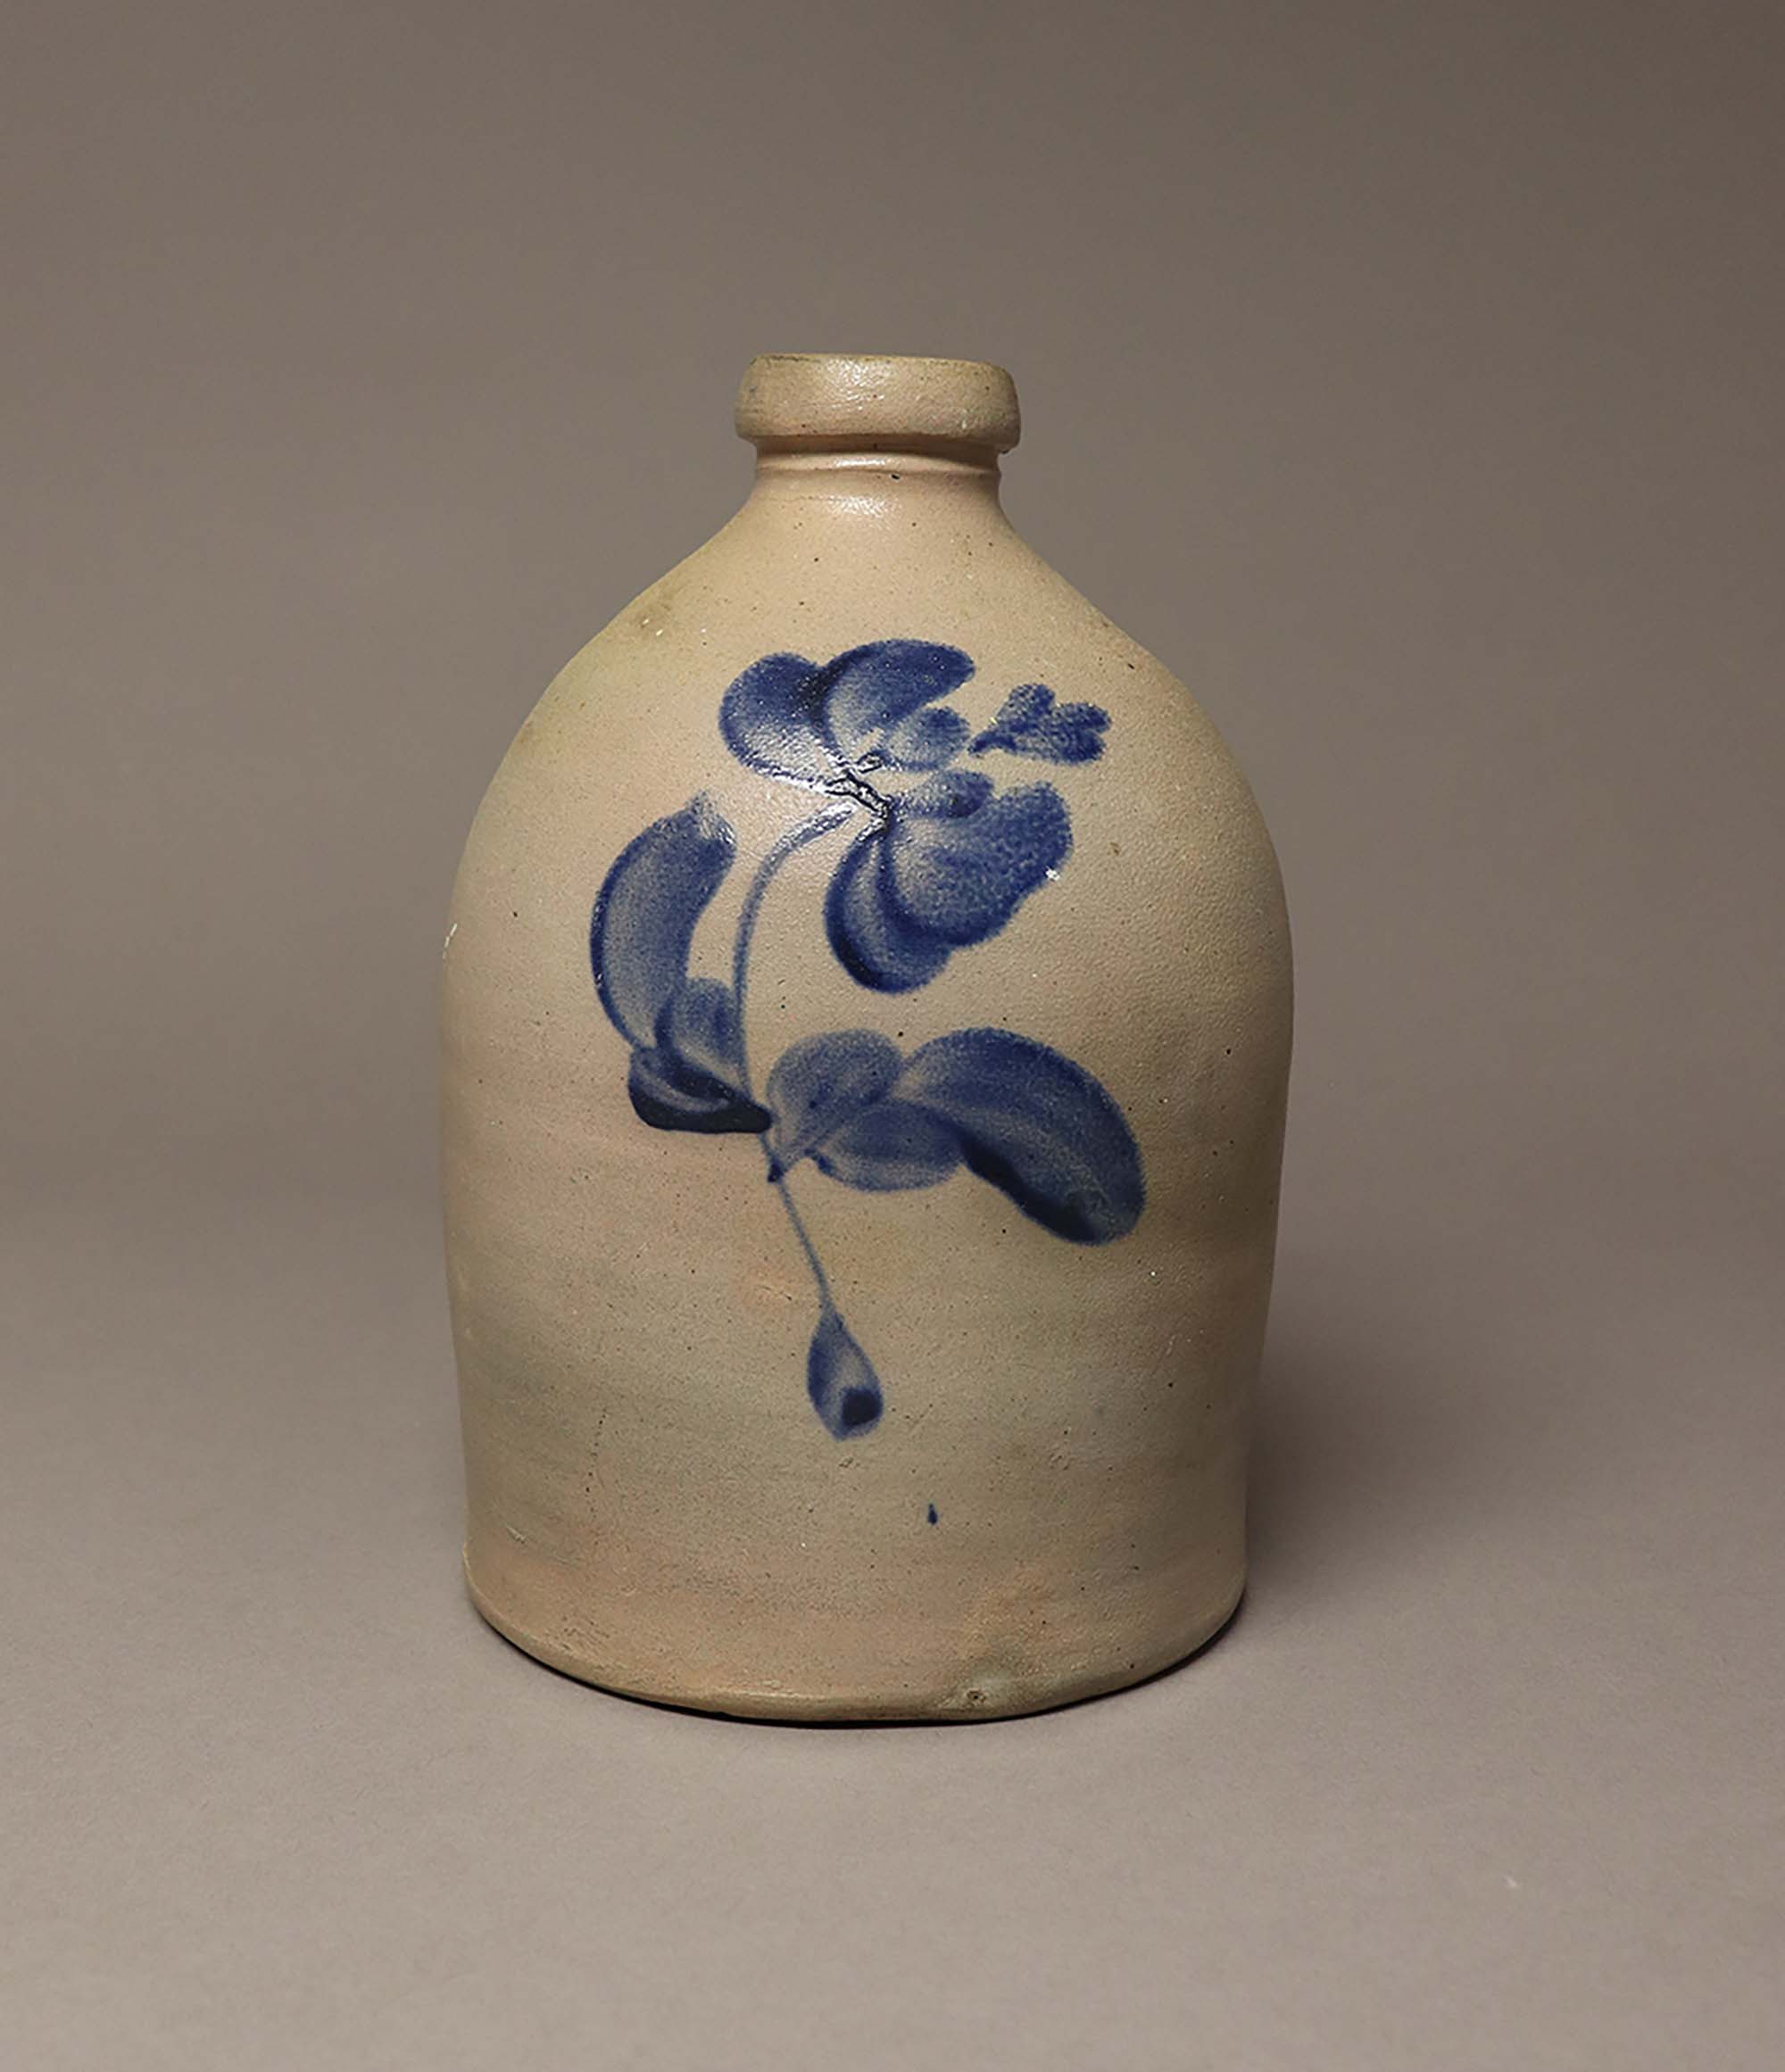 Hybrid Tuesday Talk: From Massachusetts to Texas – American-Made Stoneware at the DAR Museum